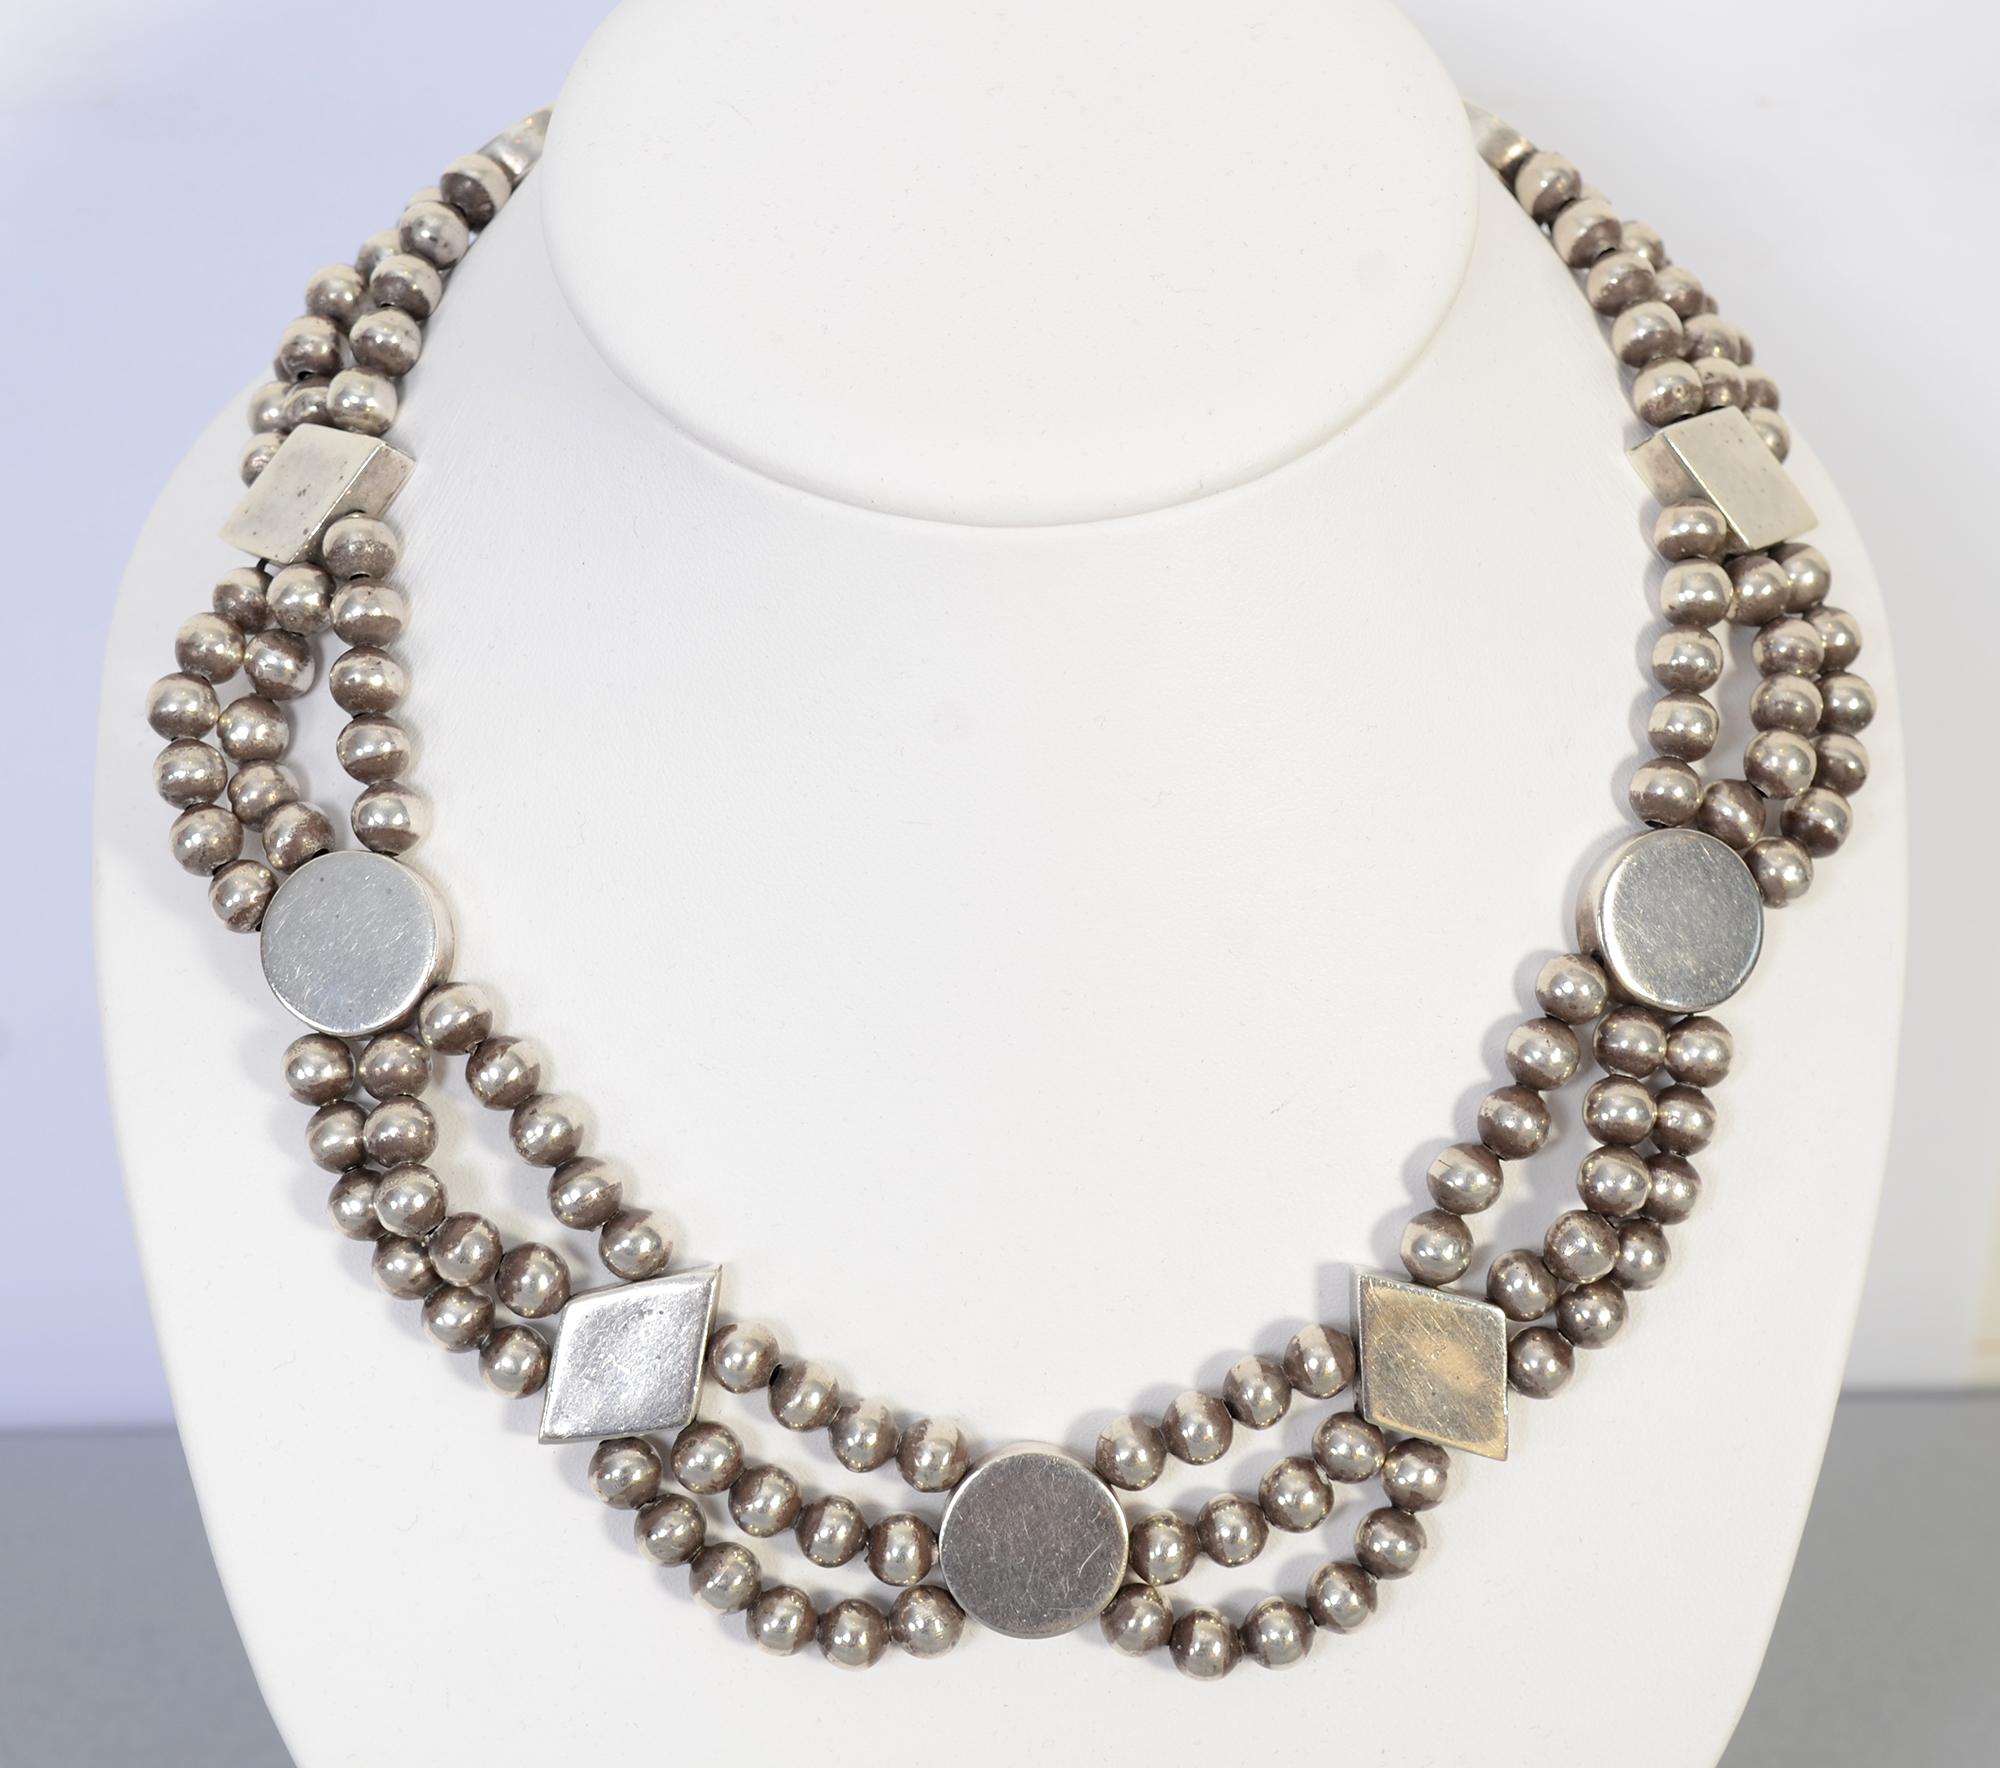 Unusual necklace by silver master, William Spratling in which he combined groups of beads with round discs and diamond shaped ornaments. The round discs are 11/16